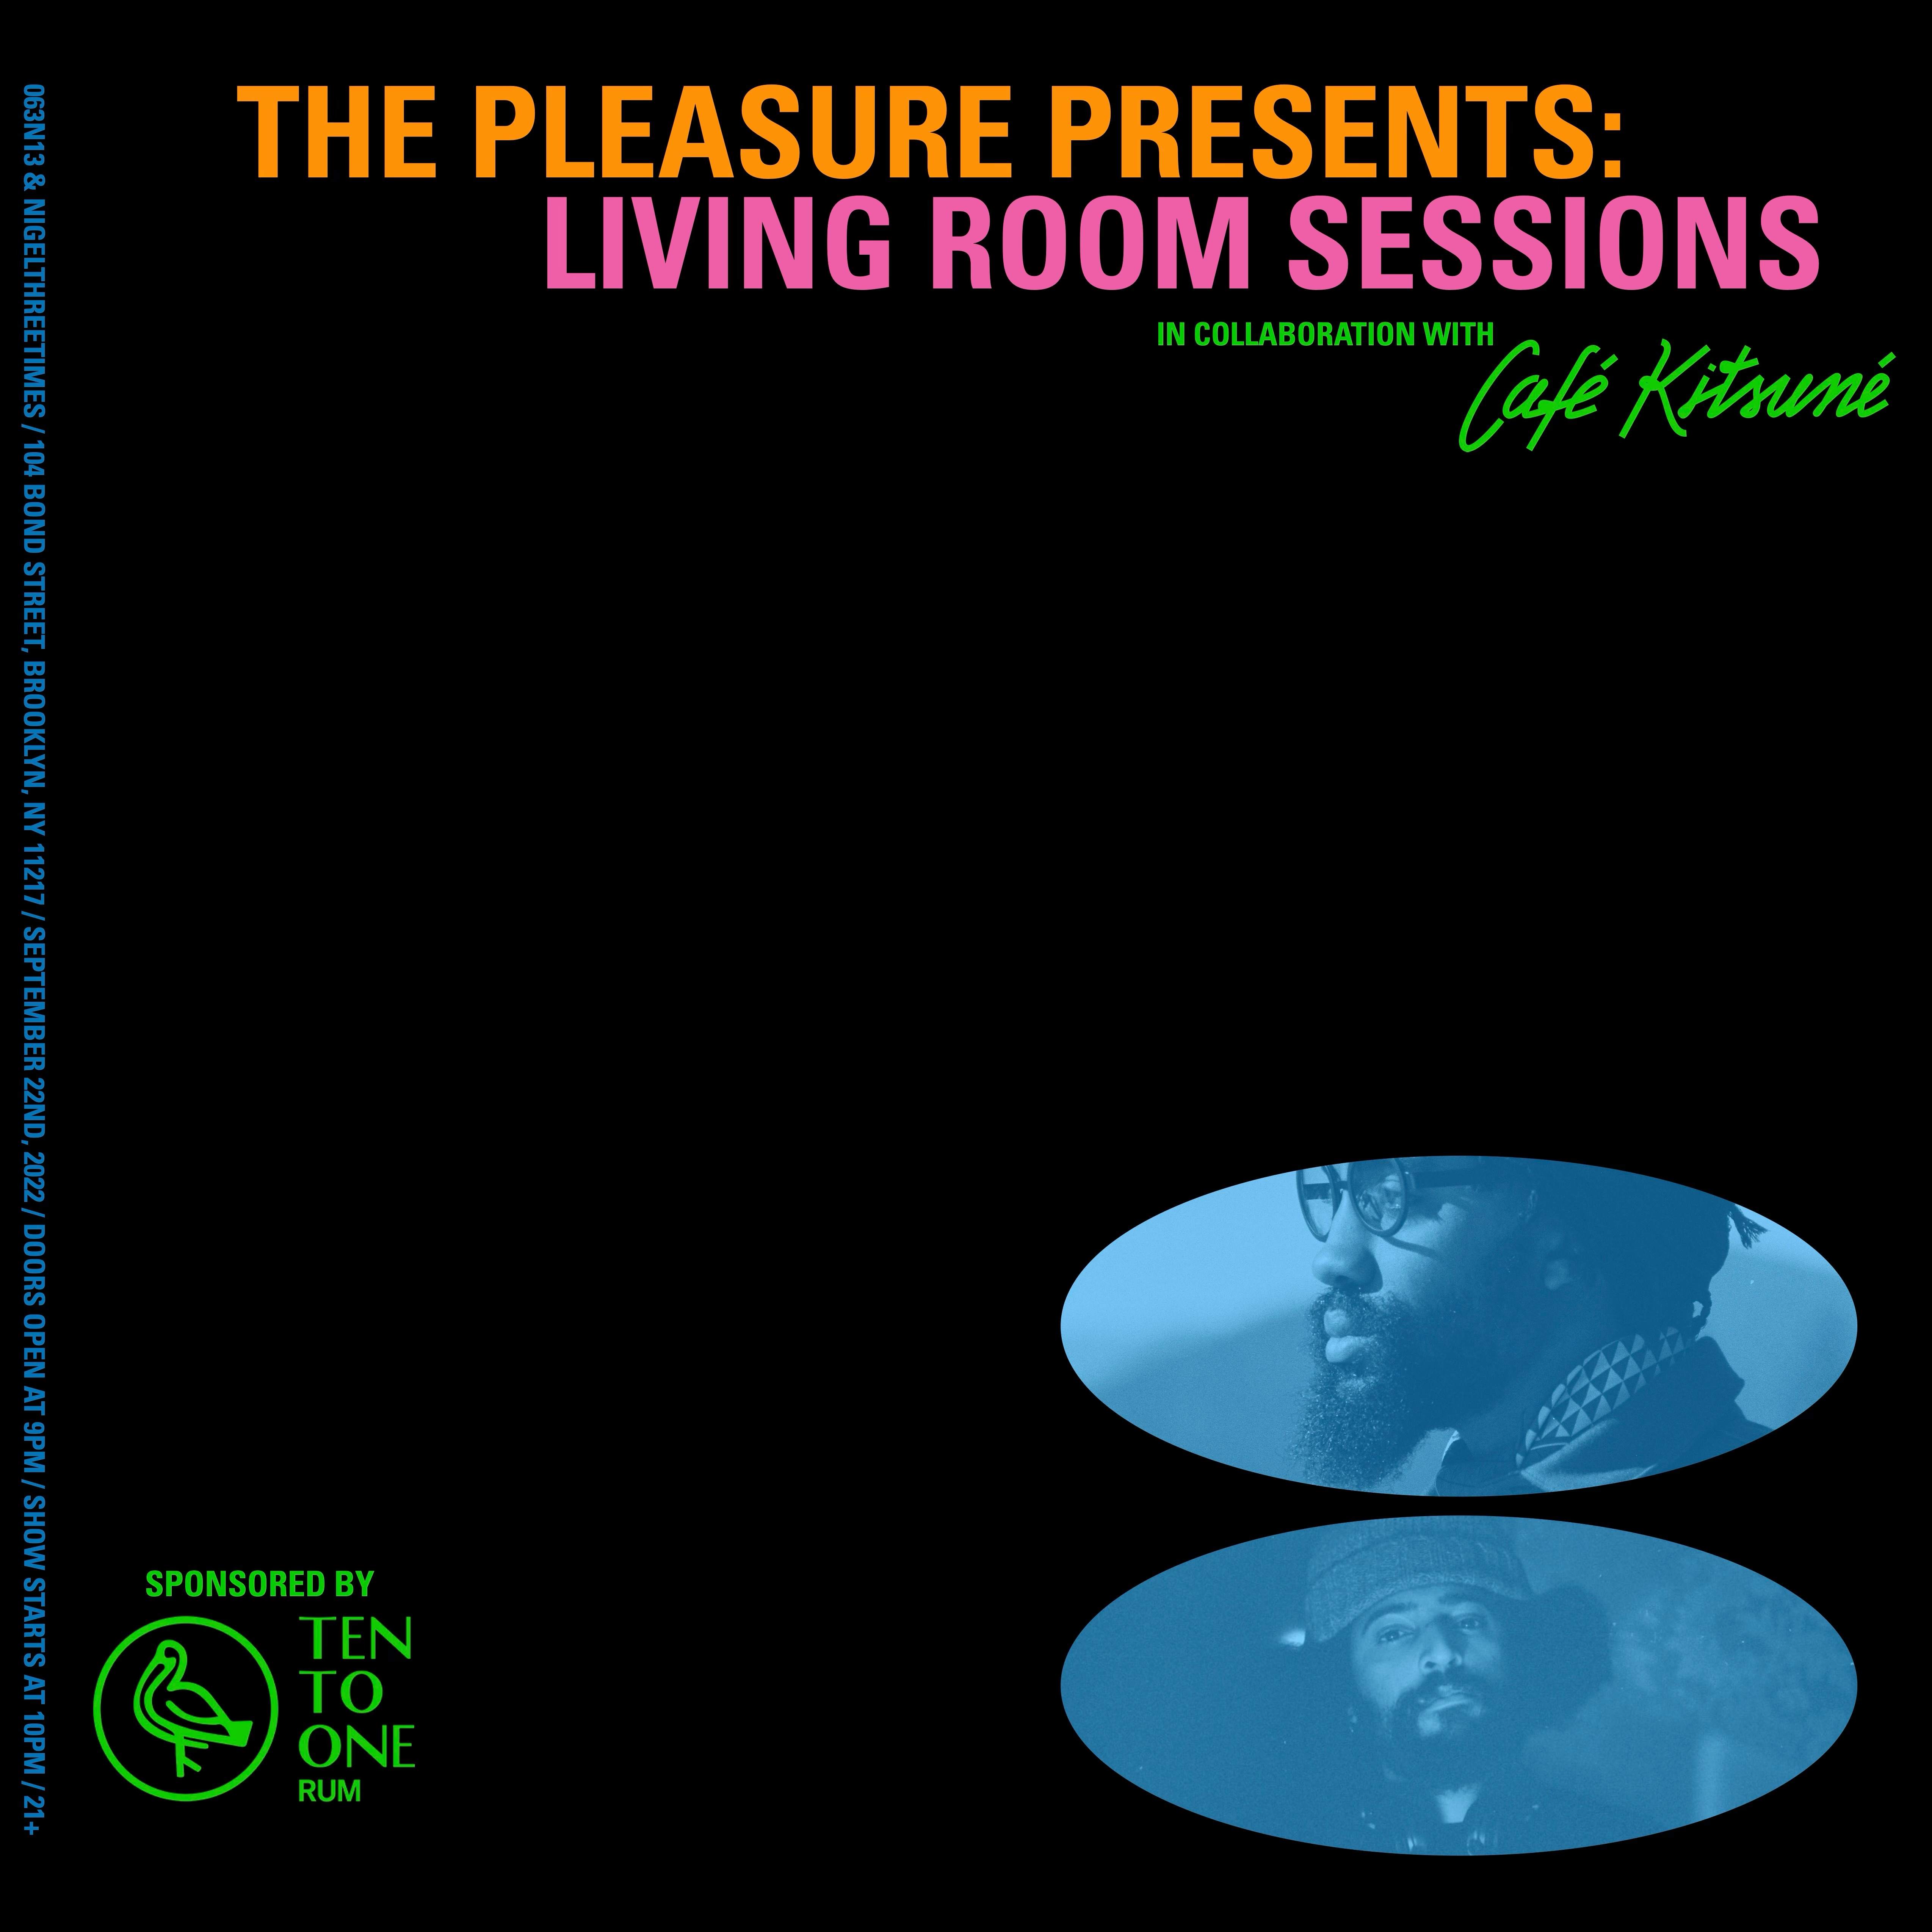 The Pleasure presents: Living Room Sessions - フライヤー表